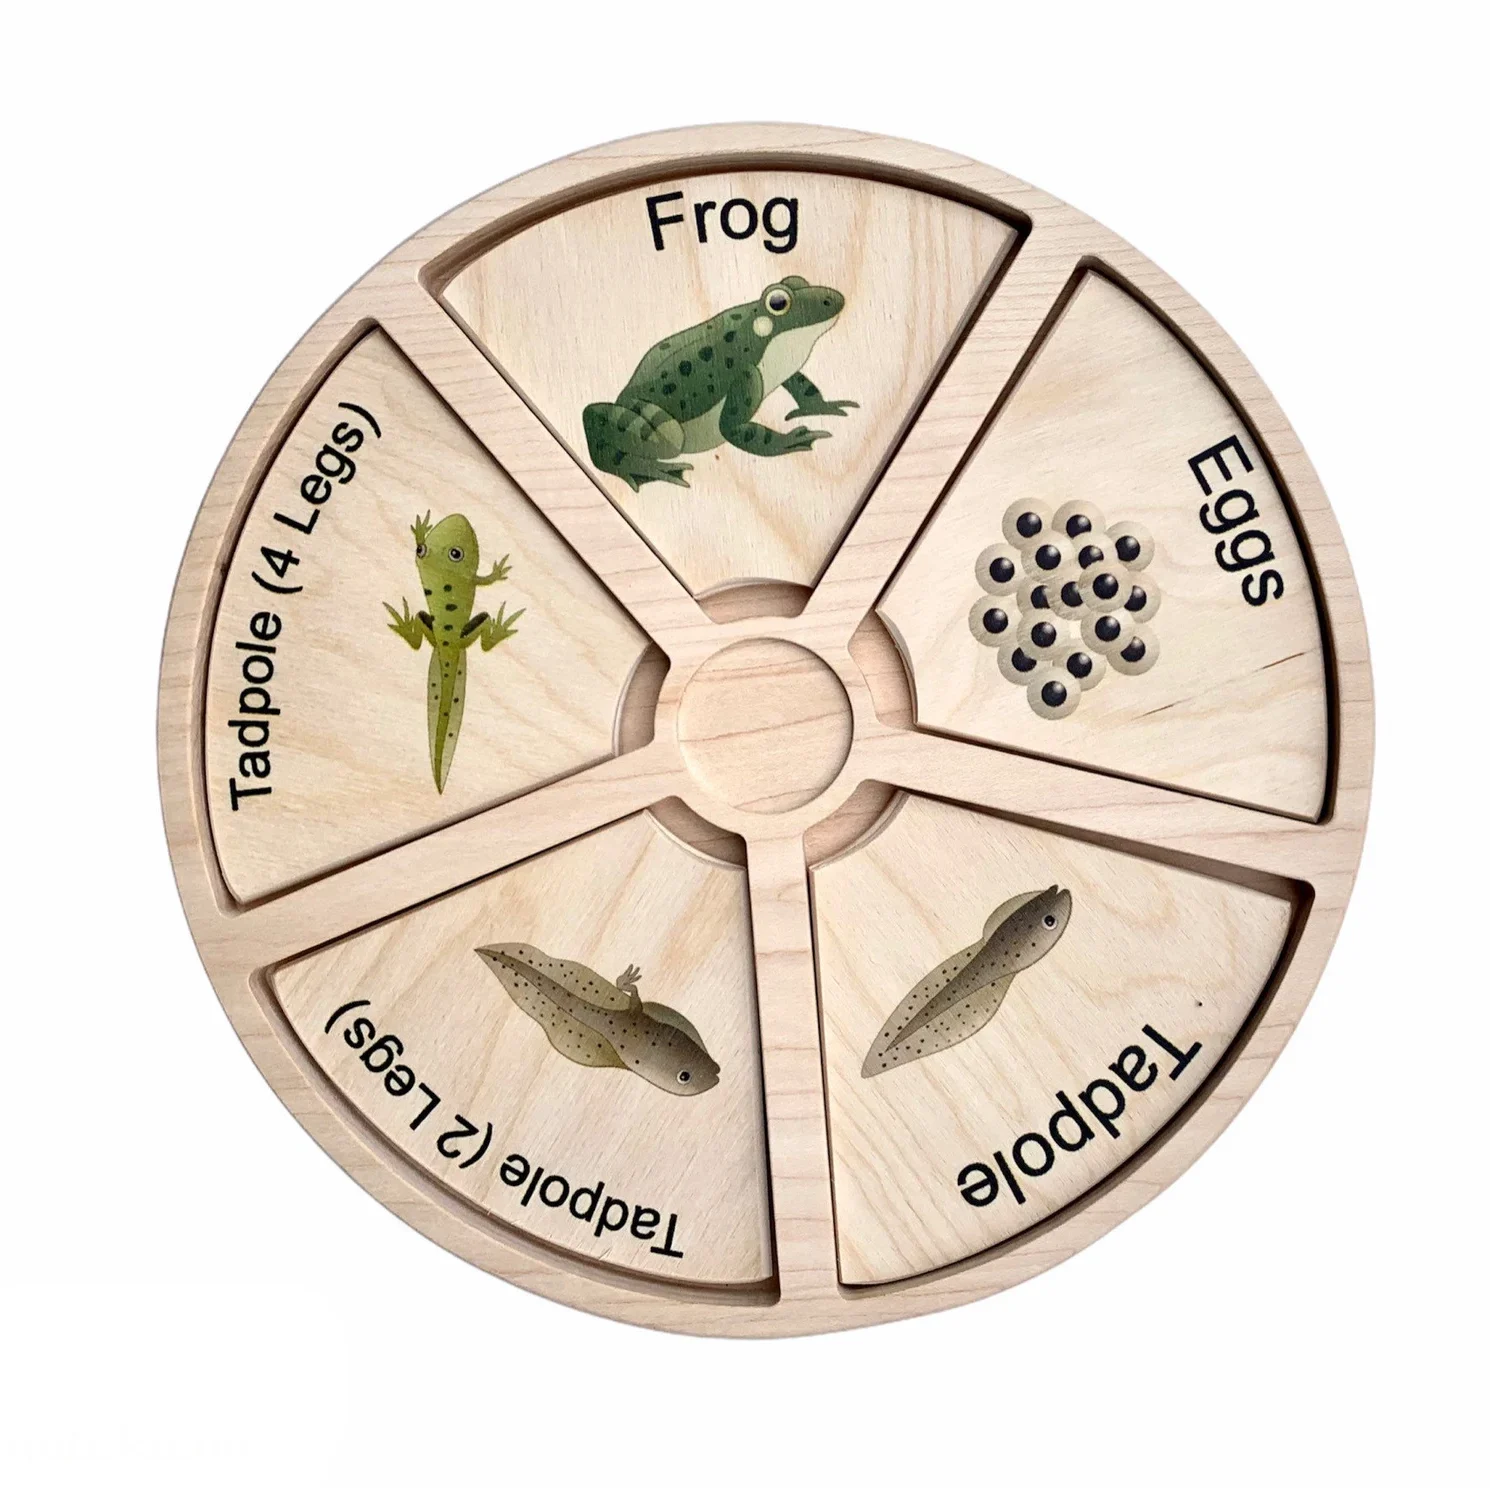 Frog Life Cycle tray wooden inserts